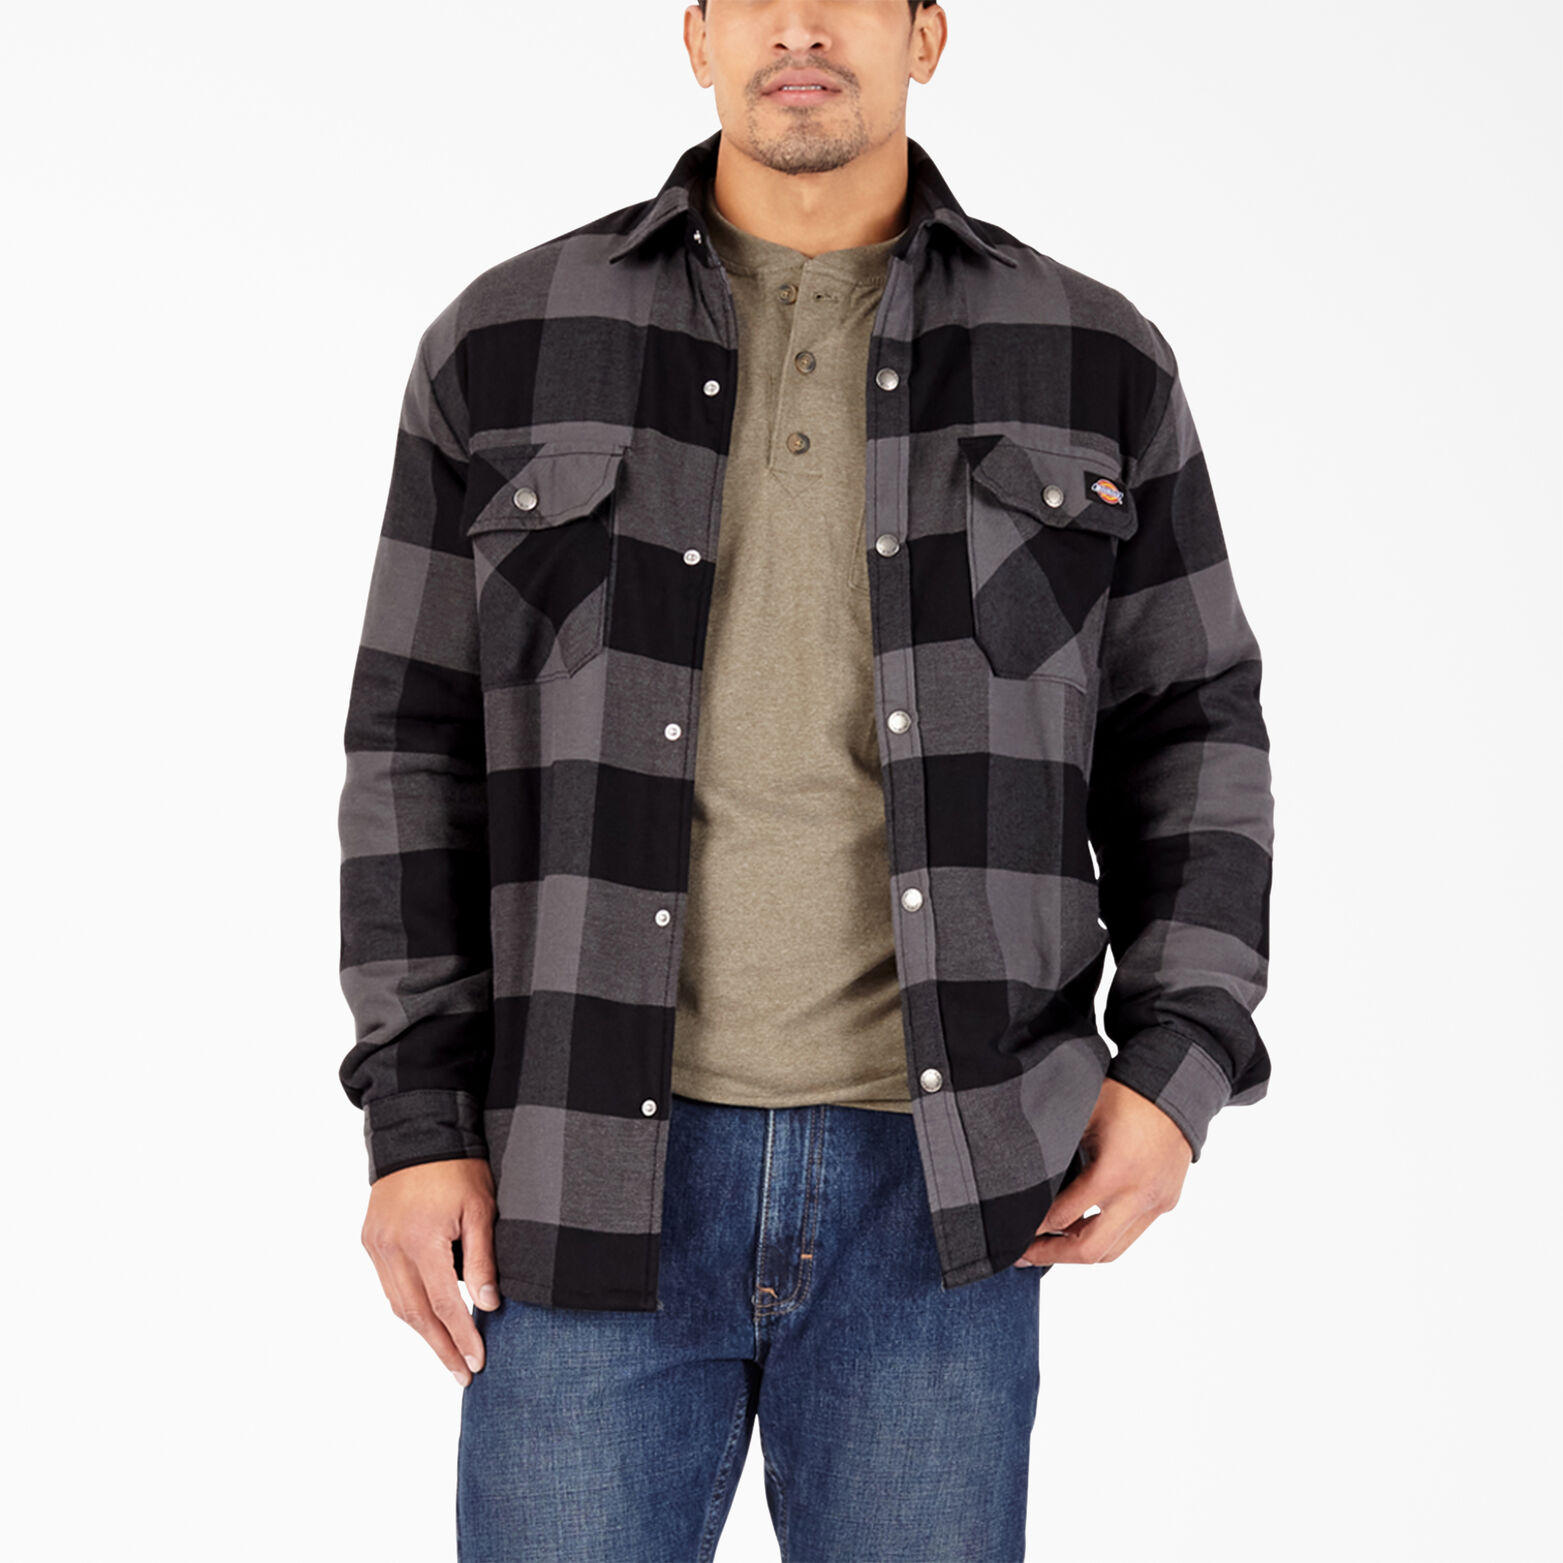 High Pile Fleece Lined Flannel Shirt Jacket with DWR, Men's Shirt Jackets,  Shackets